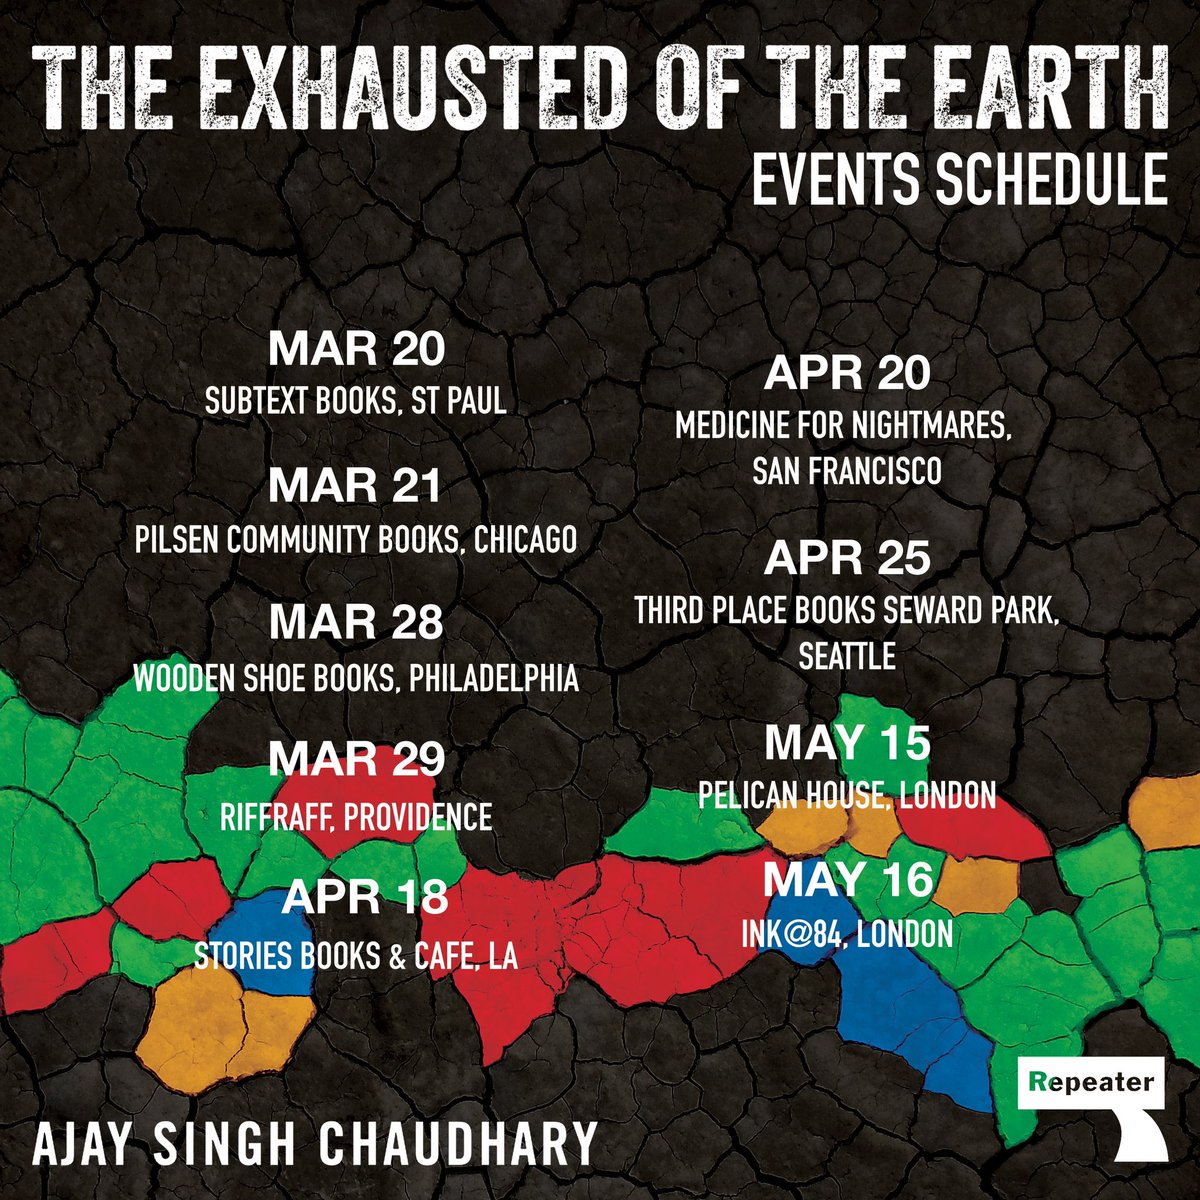 Meet The Exhausted of the Earth: Politics in a Burning World (out now, @RepeaterBooks) author Ajay Singh Chaudhary @materialist_jew at upcoming events on the West Coast in LA @StoriesEchoPark with @Gabrielle_Korn, SF with @aldatweets, Seattle @ThirdPlaceBooks, & in London in May!